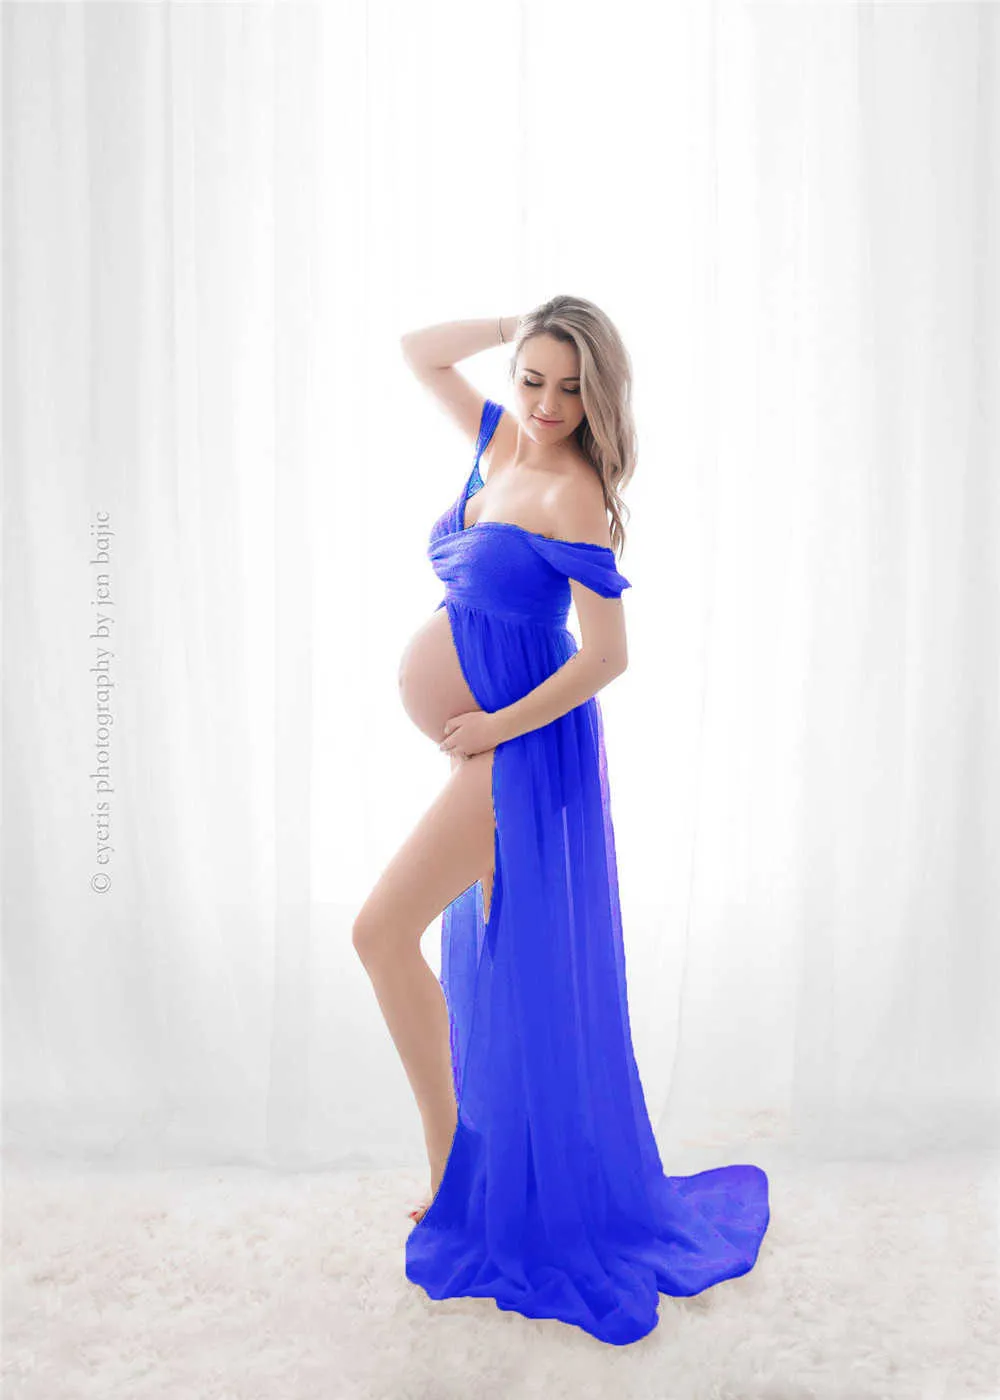 Shoulderless Maternity Dress For Photography Sexy Front Split Pregnancy Dresses For Women Maxi Maternity Gown Photo Shoots Props (2)